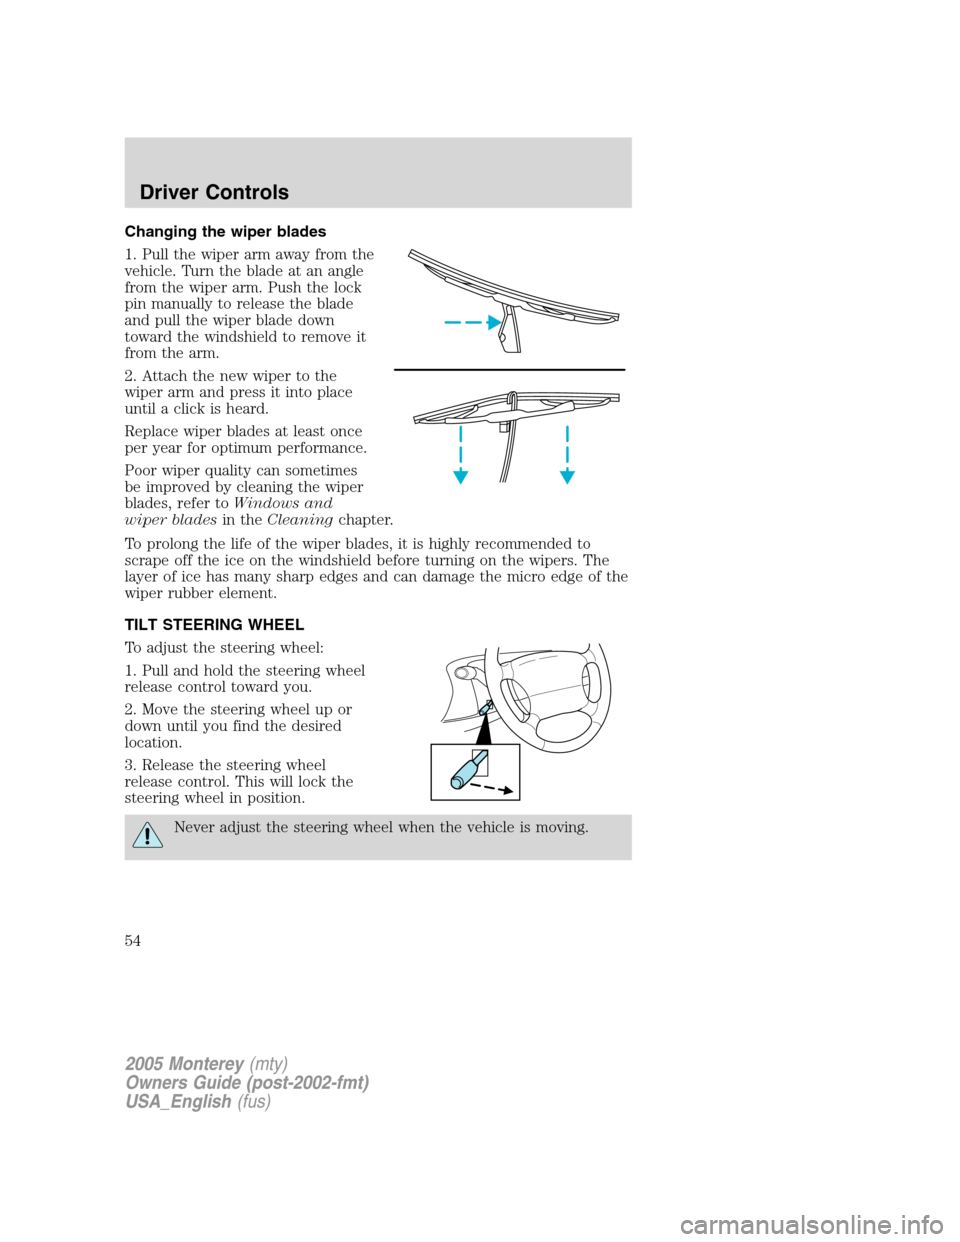 Mercury Monterey 2005  Owners Manuals Changing the wiper blades
1. Pull the wiper arm away from the
vehicle. Turn the blade at an angle
from the wiper arm. Push the lock
pin manually to release the blade
and pull the wiper blade down
towa